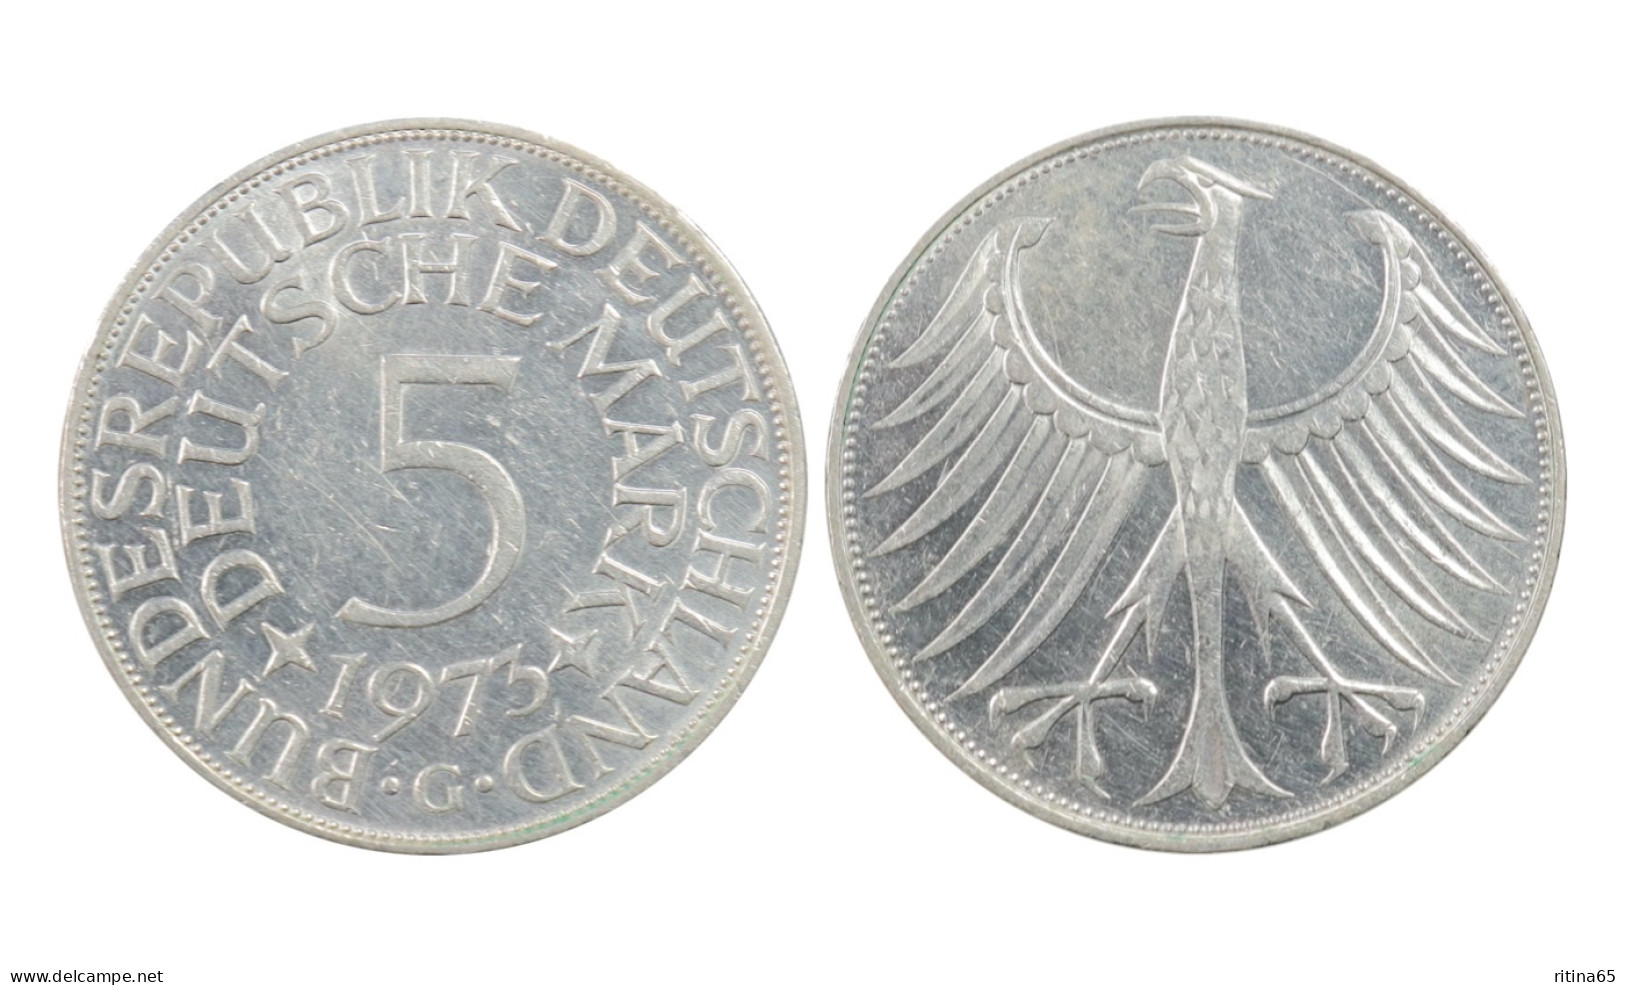 GERMANIA !!! 5 MARK 1973 G IN ARGENTO KM# 112 - 5 Marcos